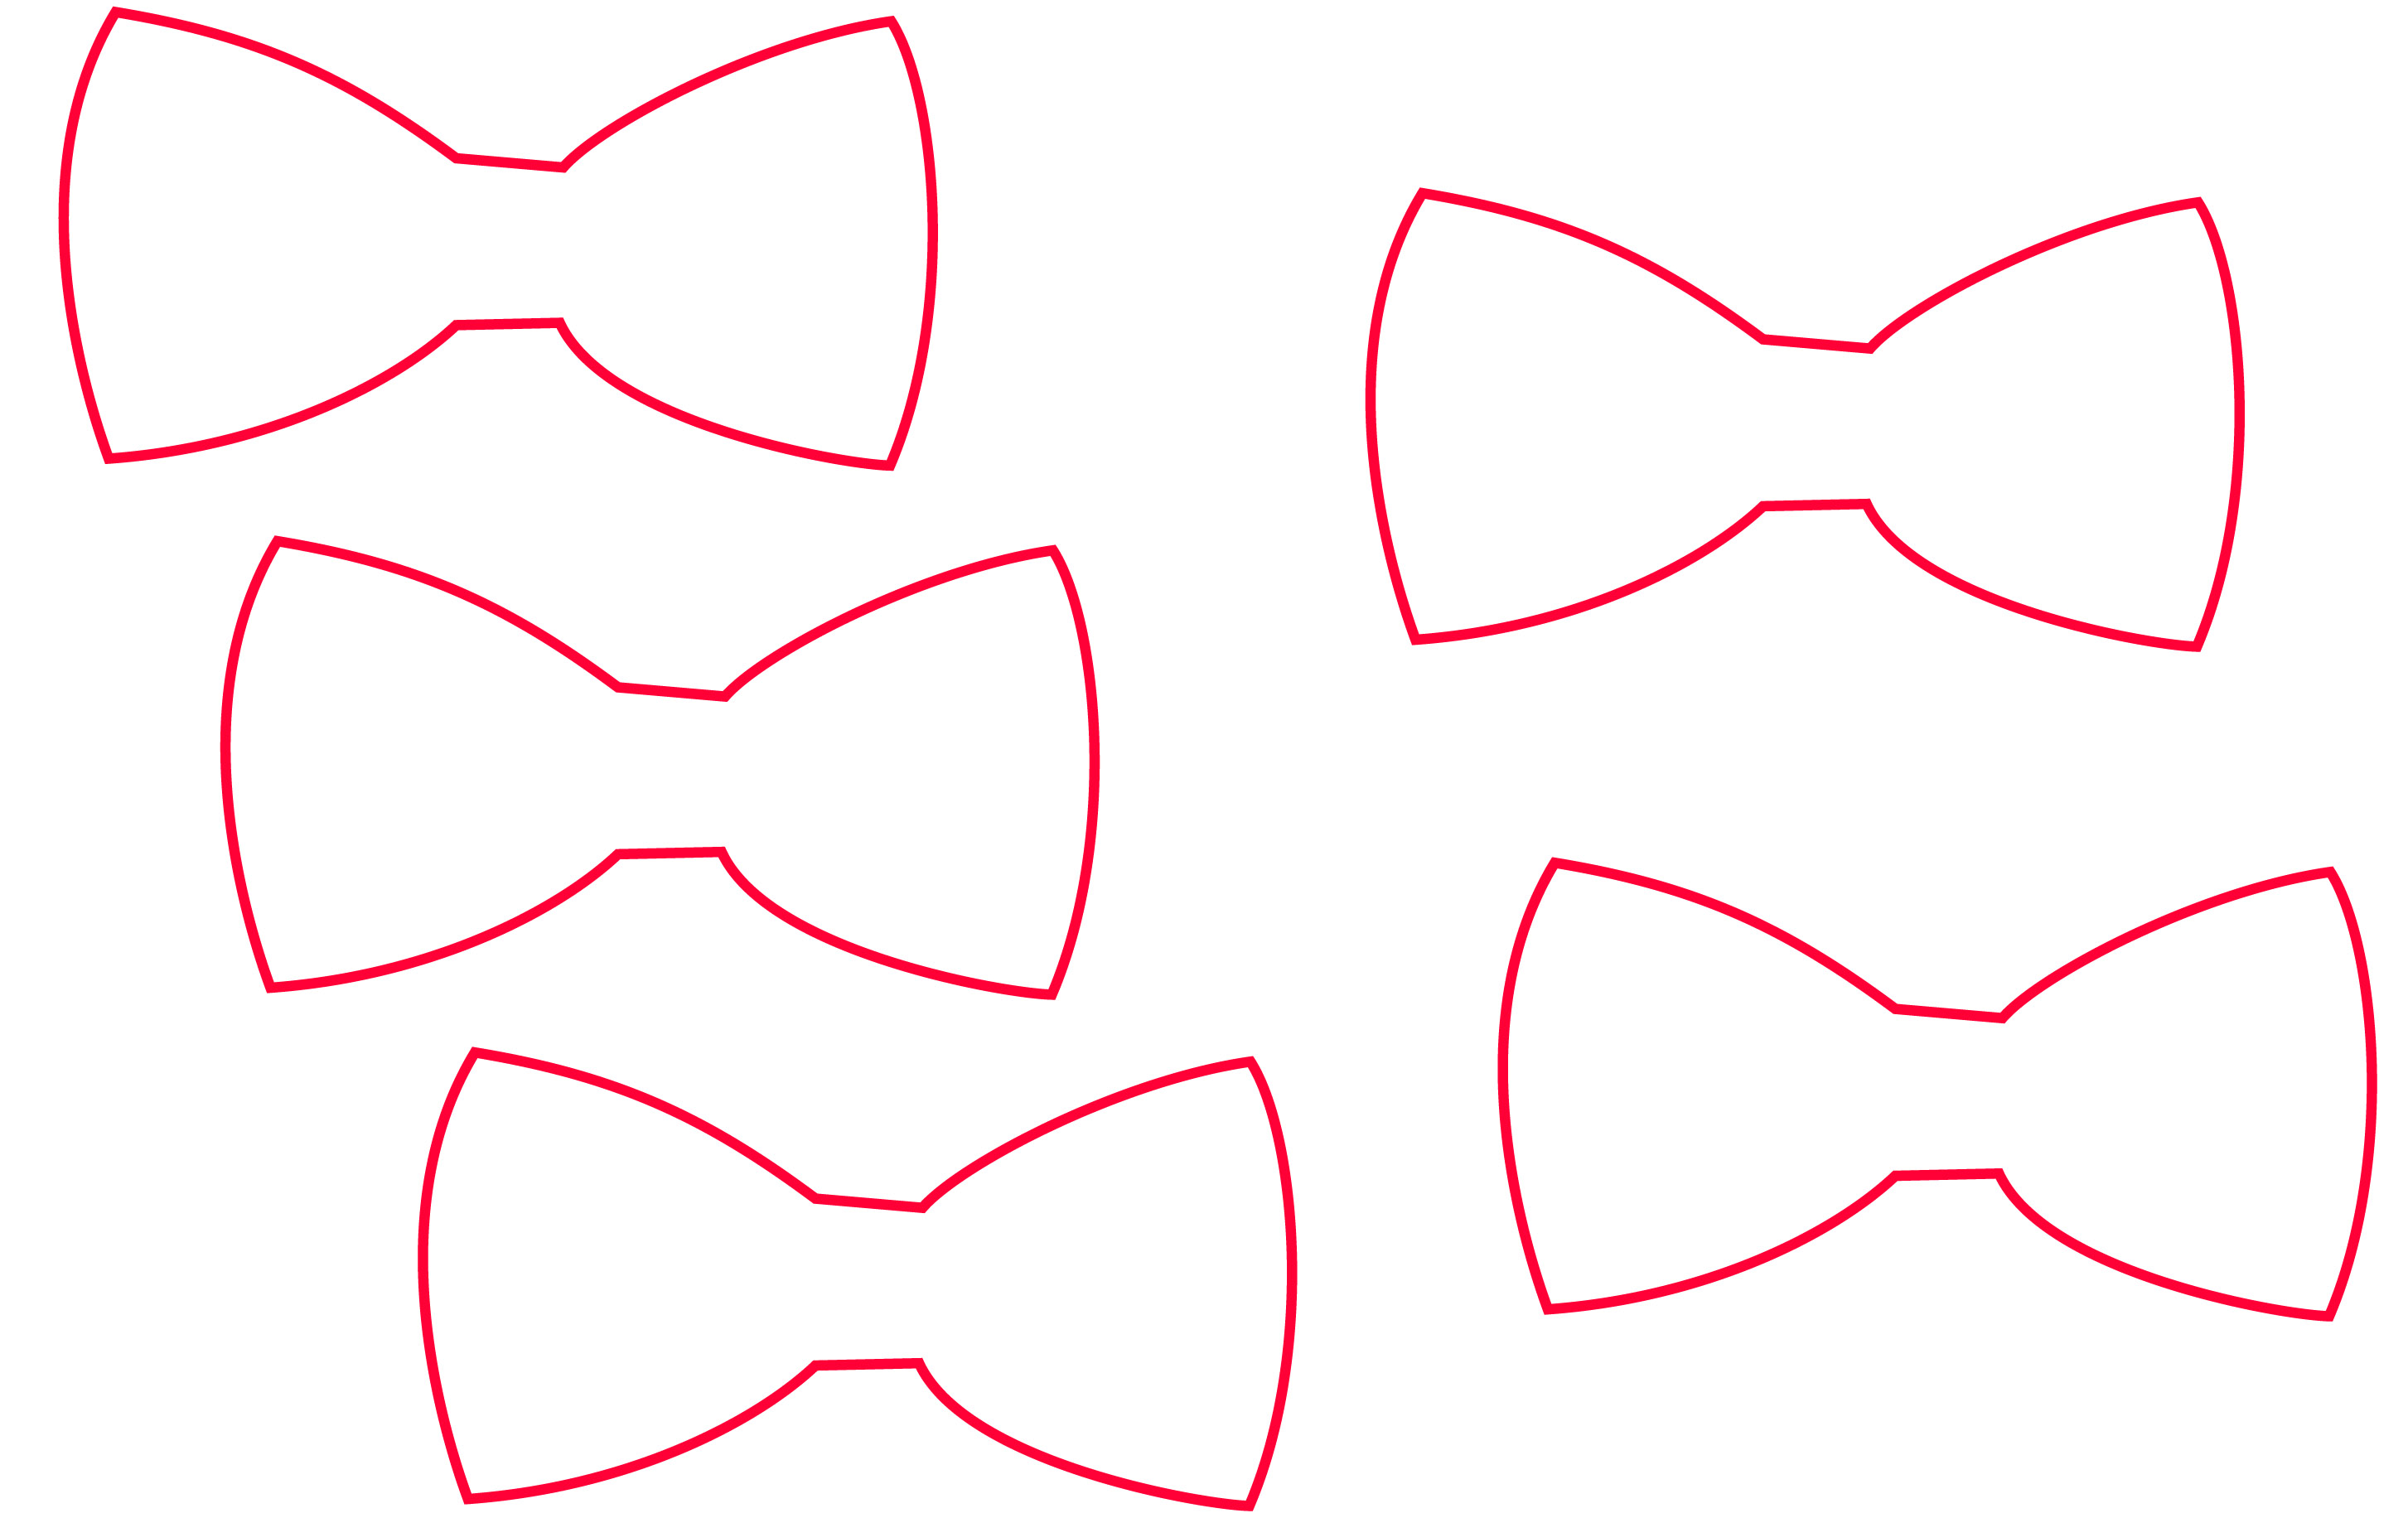 Free Bow Tie Template, Download Free Bow Tie Template png images, Free